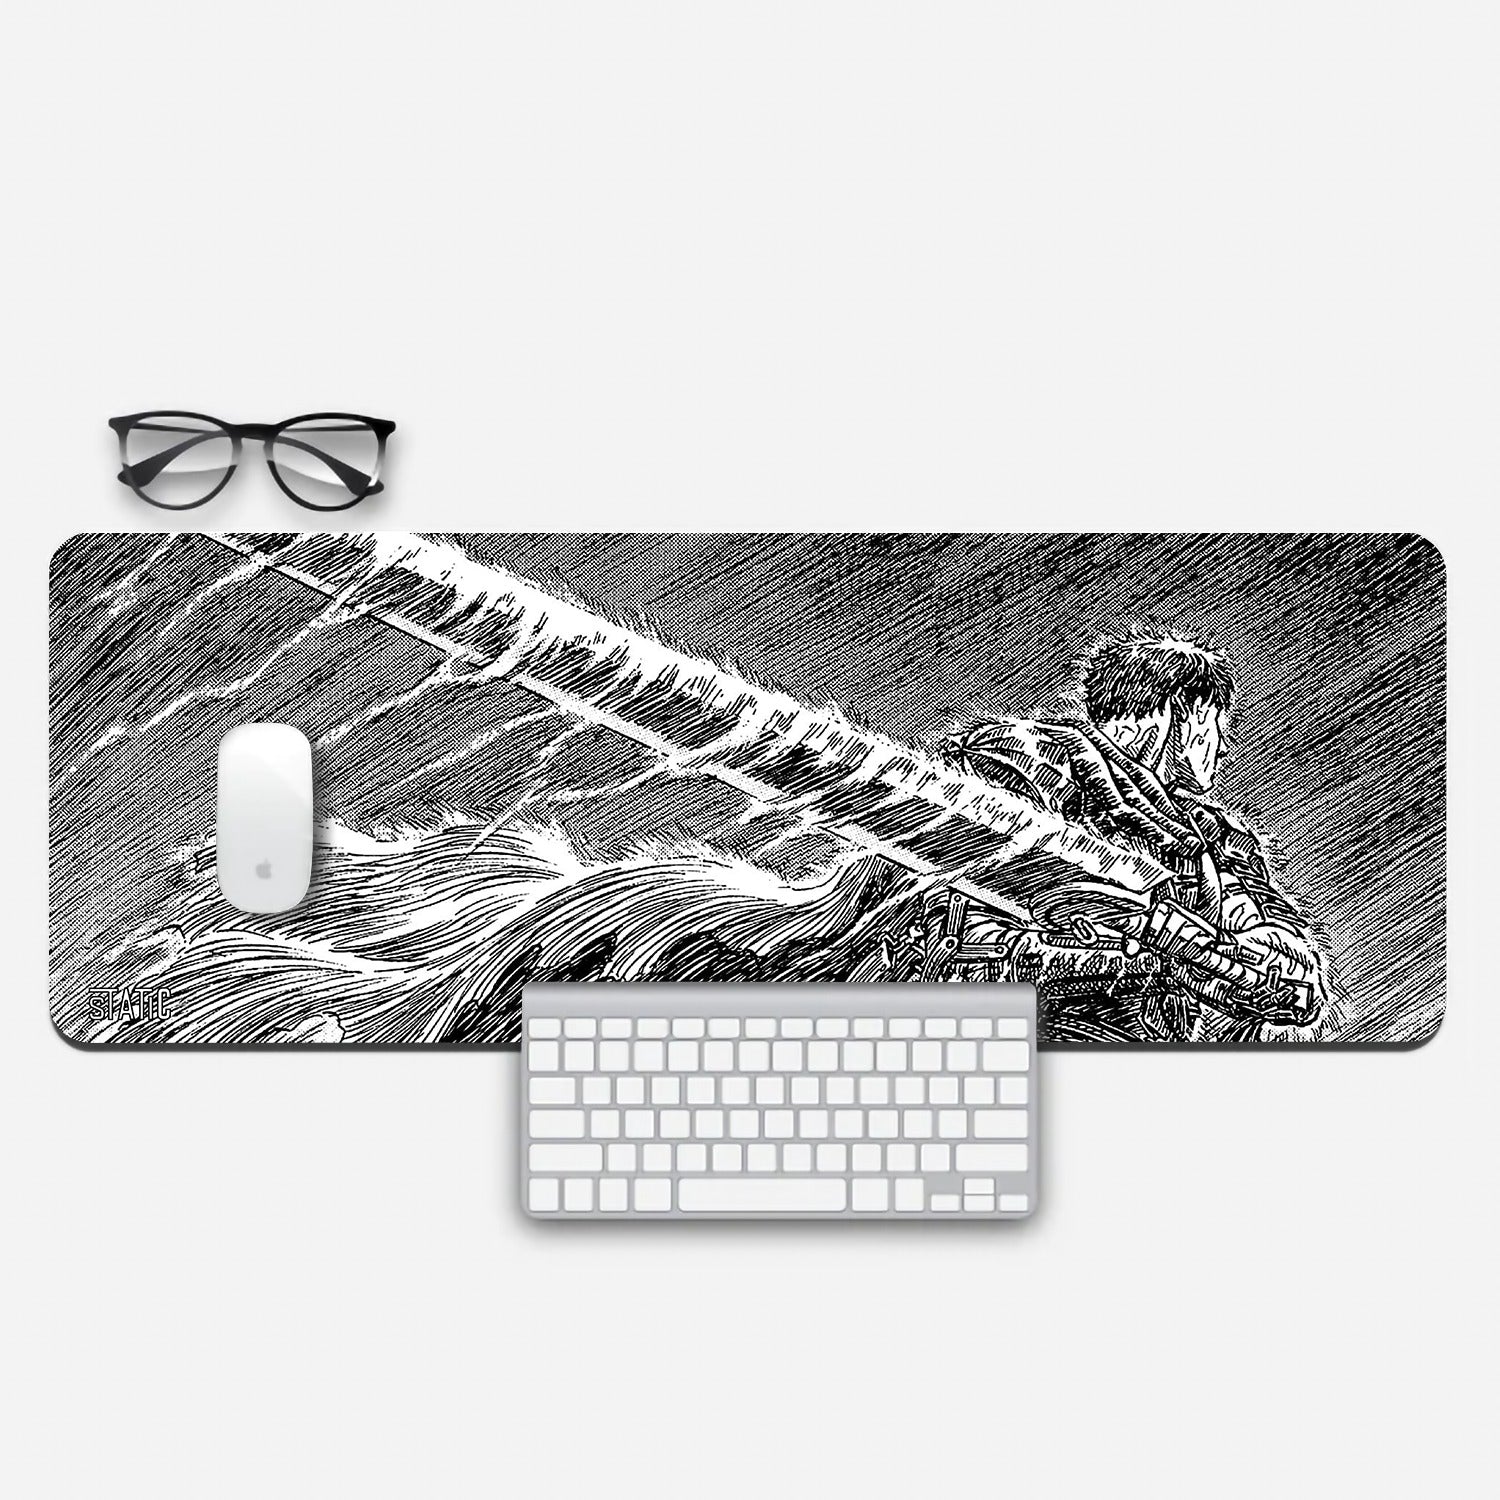 Unleash the Dark Hero with Our Extended Gaming Mouse Pad  Step into the grim and epic world of Berserk with our extended mouse pad. It features a captivating black and white image of Guts, the Black Swordsman, poised for battle amidst torrential rain. This iconic design brings the relentless determination of Guts to your gaming setup. Elevate your control and precision - order now and become a part of Guts' relentless quest for vengeance and survival in the world of Berserk!